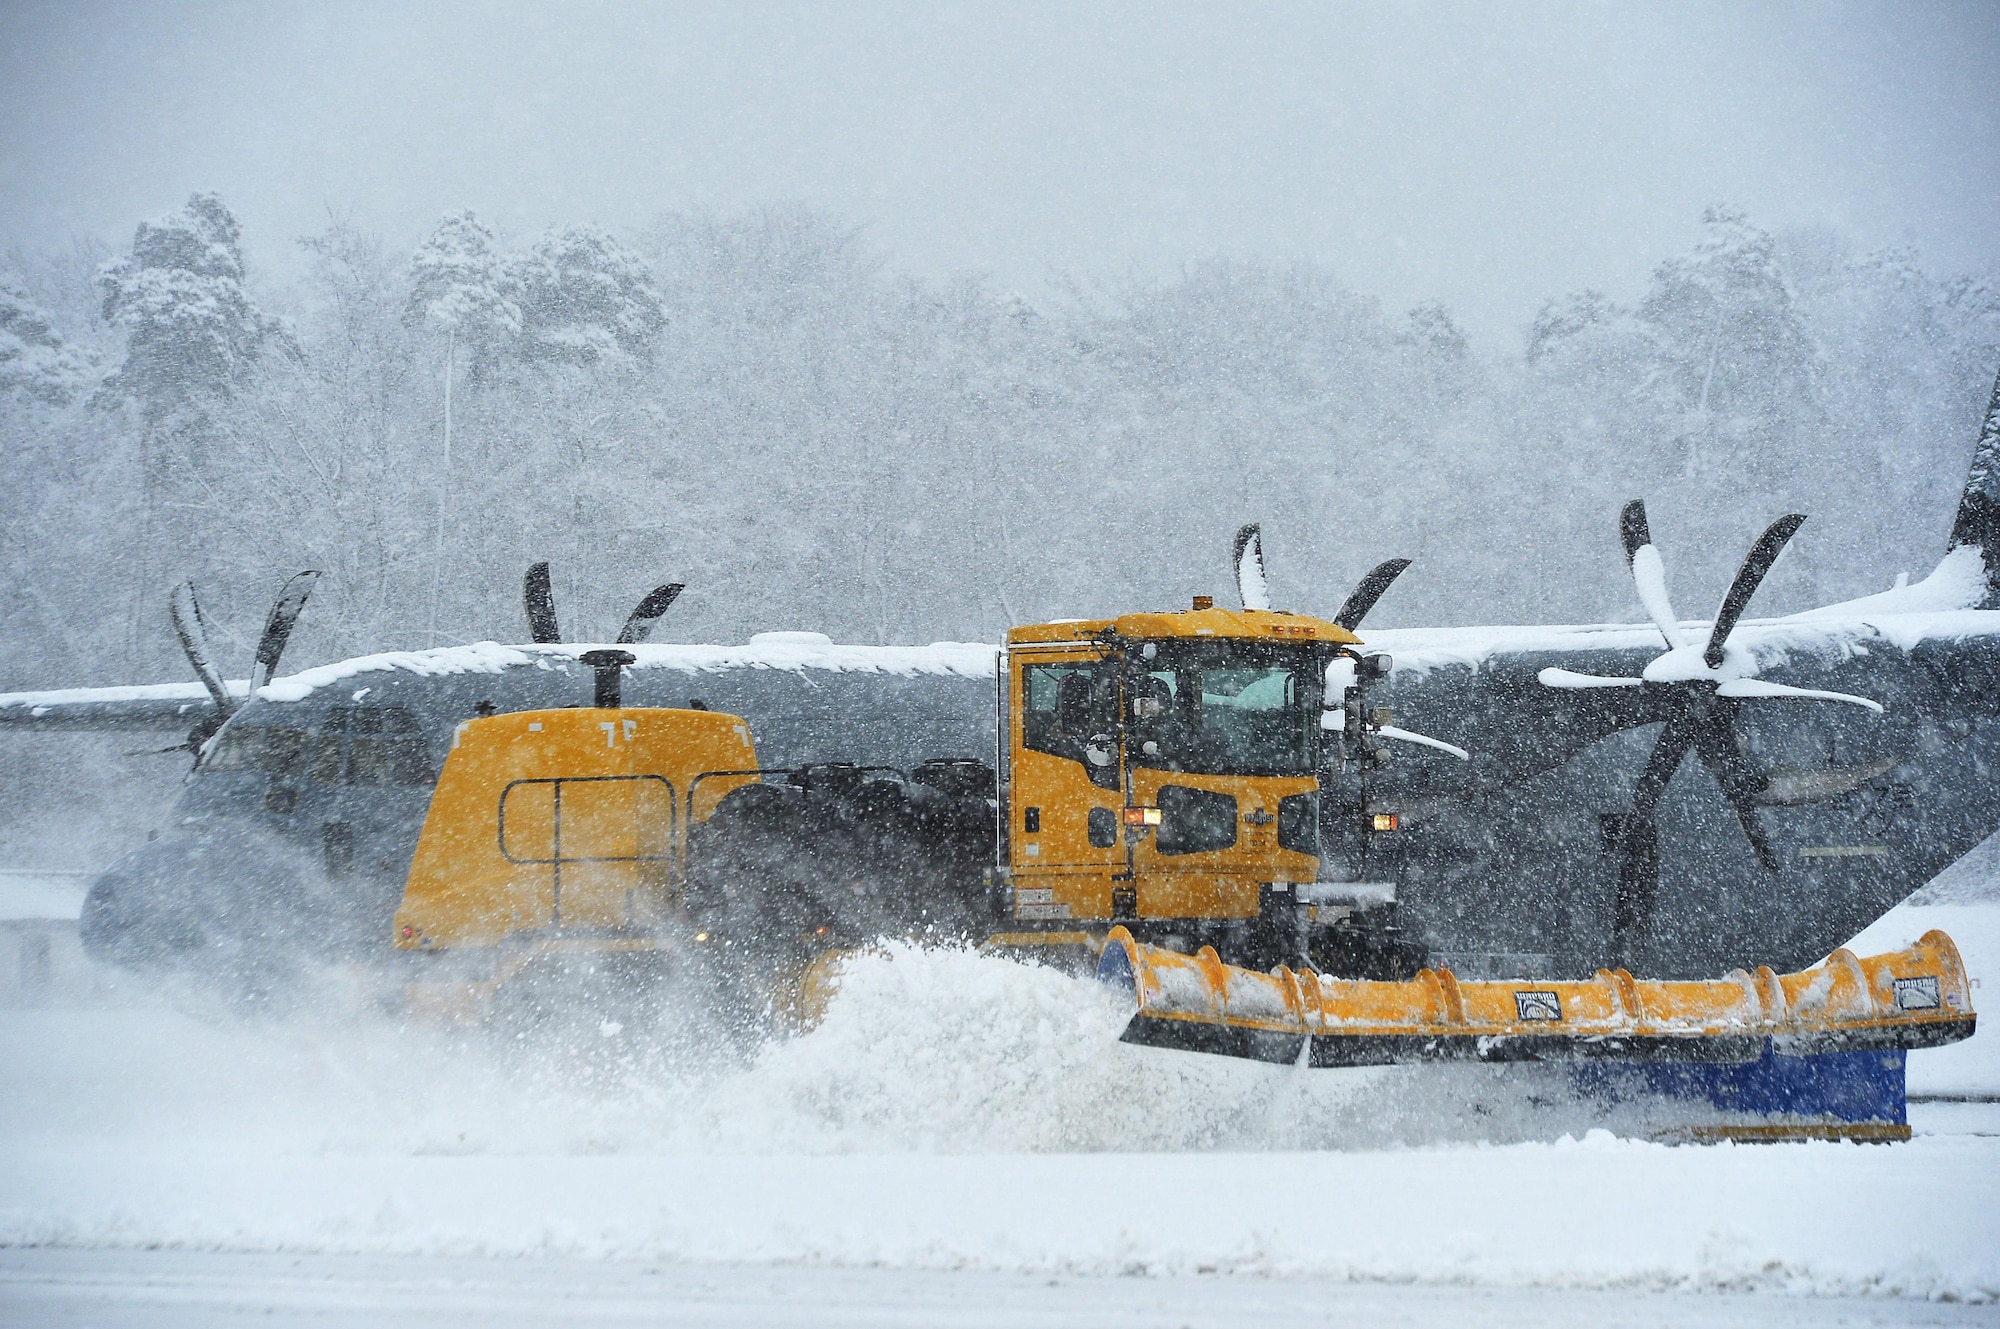 A snow plow removes snow on the flightline at Ramstein Air Base, Germany, Jan. 10, 2017. Snow removal operations commenced throughout Ramstein as continuous heavy snow persisted throughout the majority of the day. Other snow removal operations included de-icing aircraft and applying salt to roads and walkways. (U.S. Air Force photo by Airman 1st Class Joshua Magbanua)